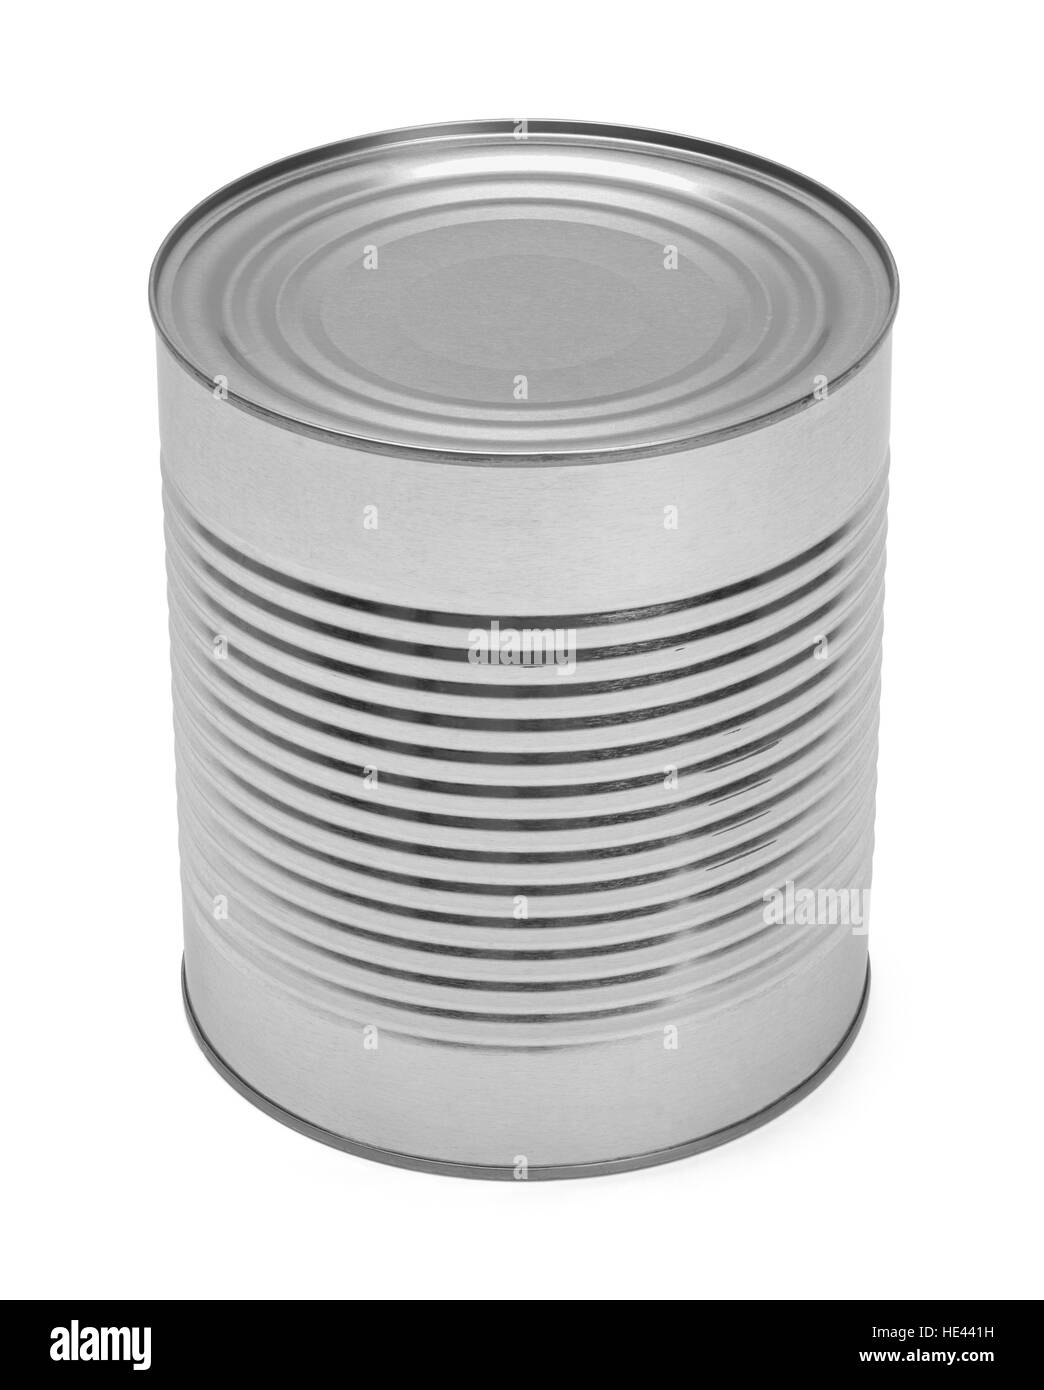 Big Tin Can with Copy Space Isolated on White Background. Stock Photo